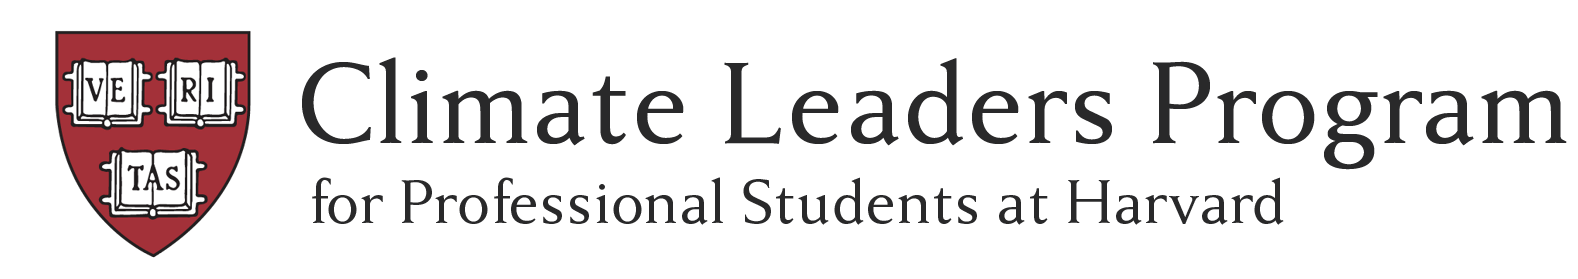 Climate Leaders Program for Professional Students at Harvard